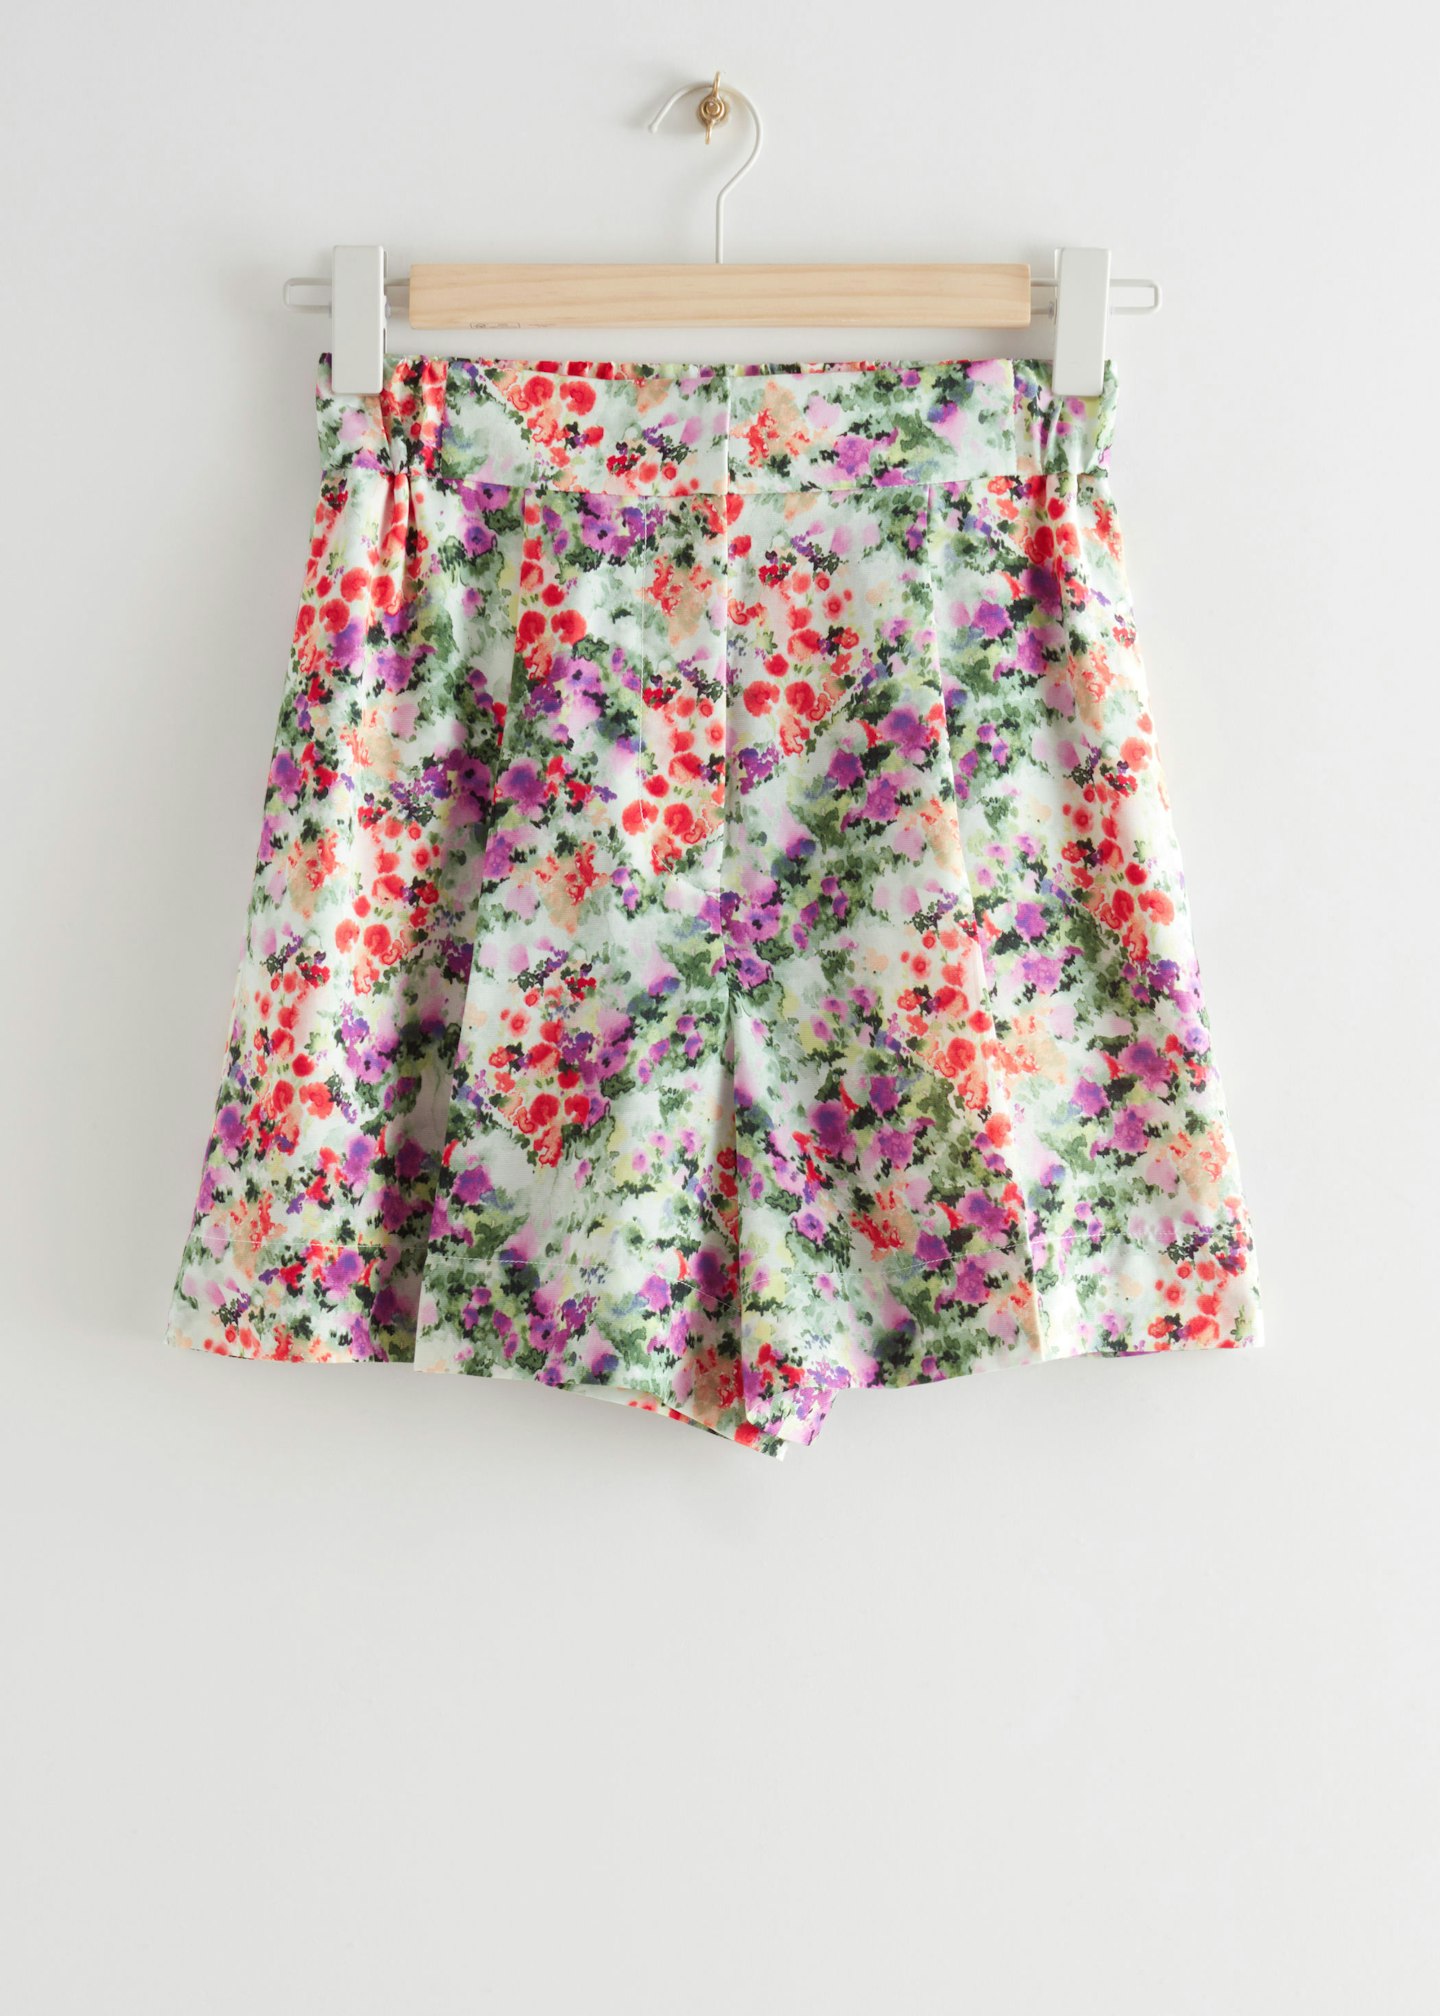 & Other Stories, Wide Floral-Print Shorts, £55